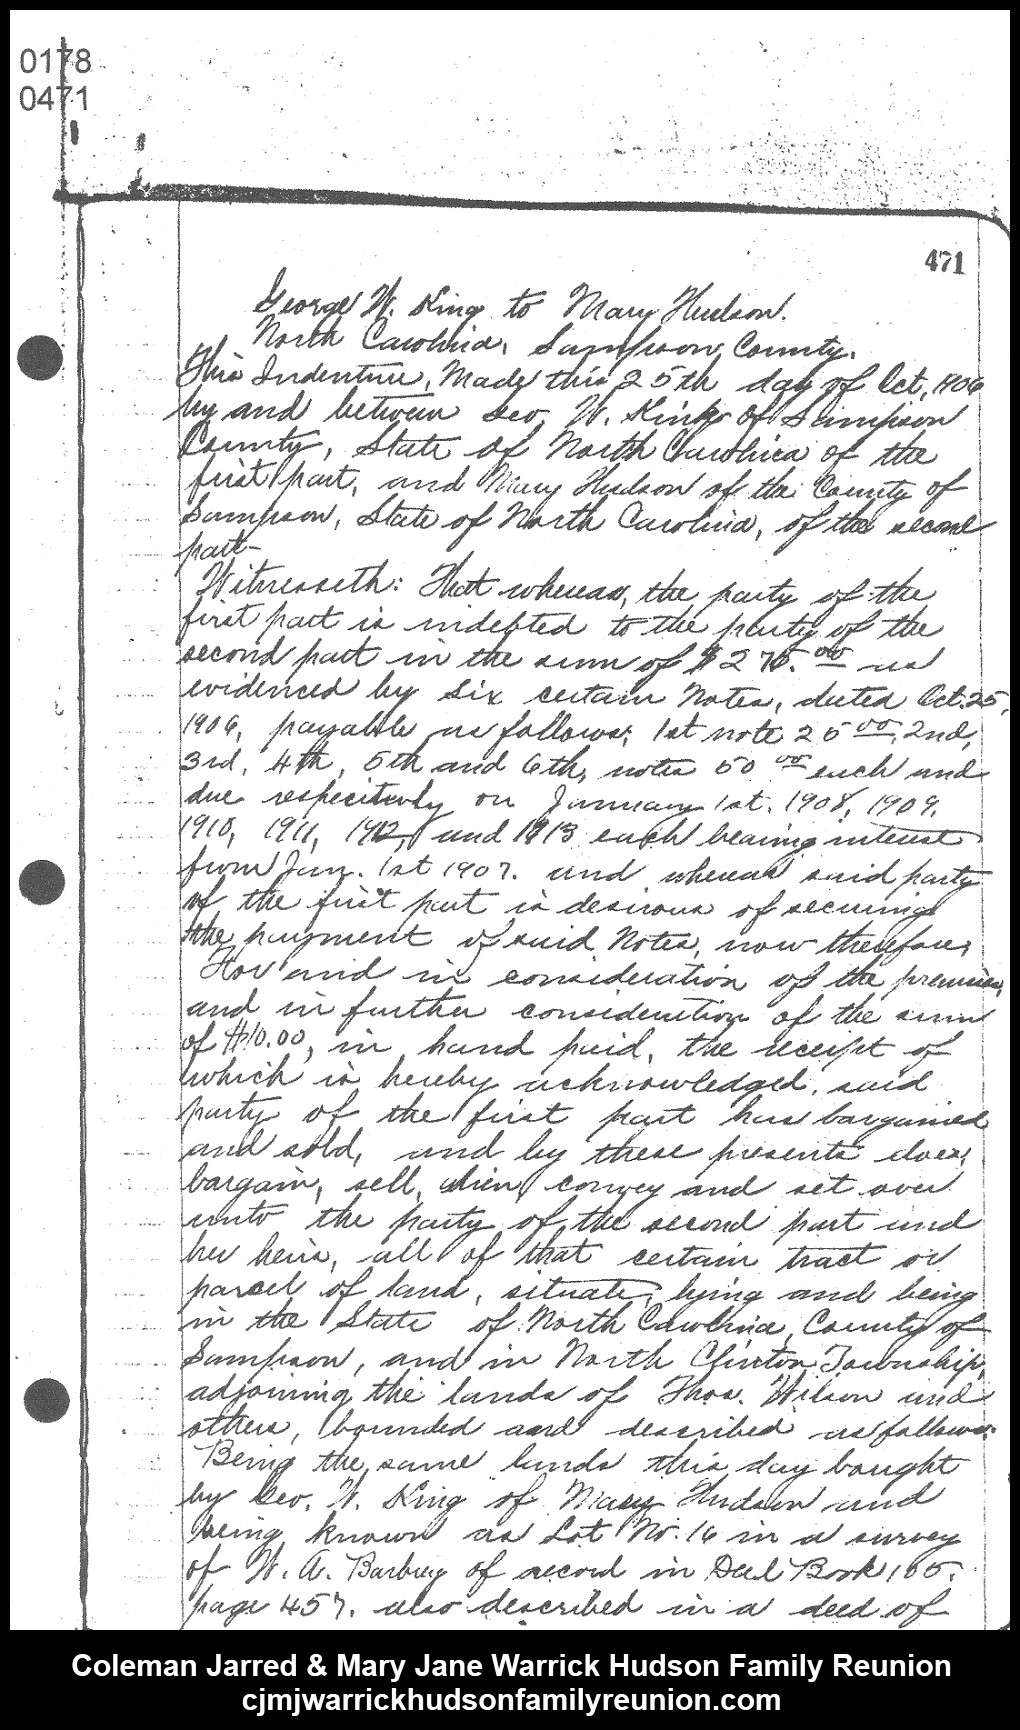 1909, 11-24 - Deed - George W. King to MJ (page 1 of 3)